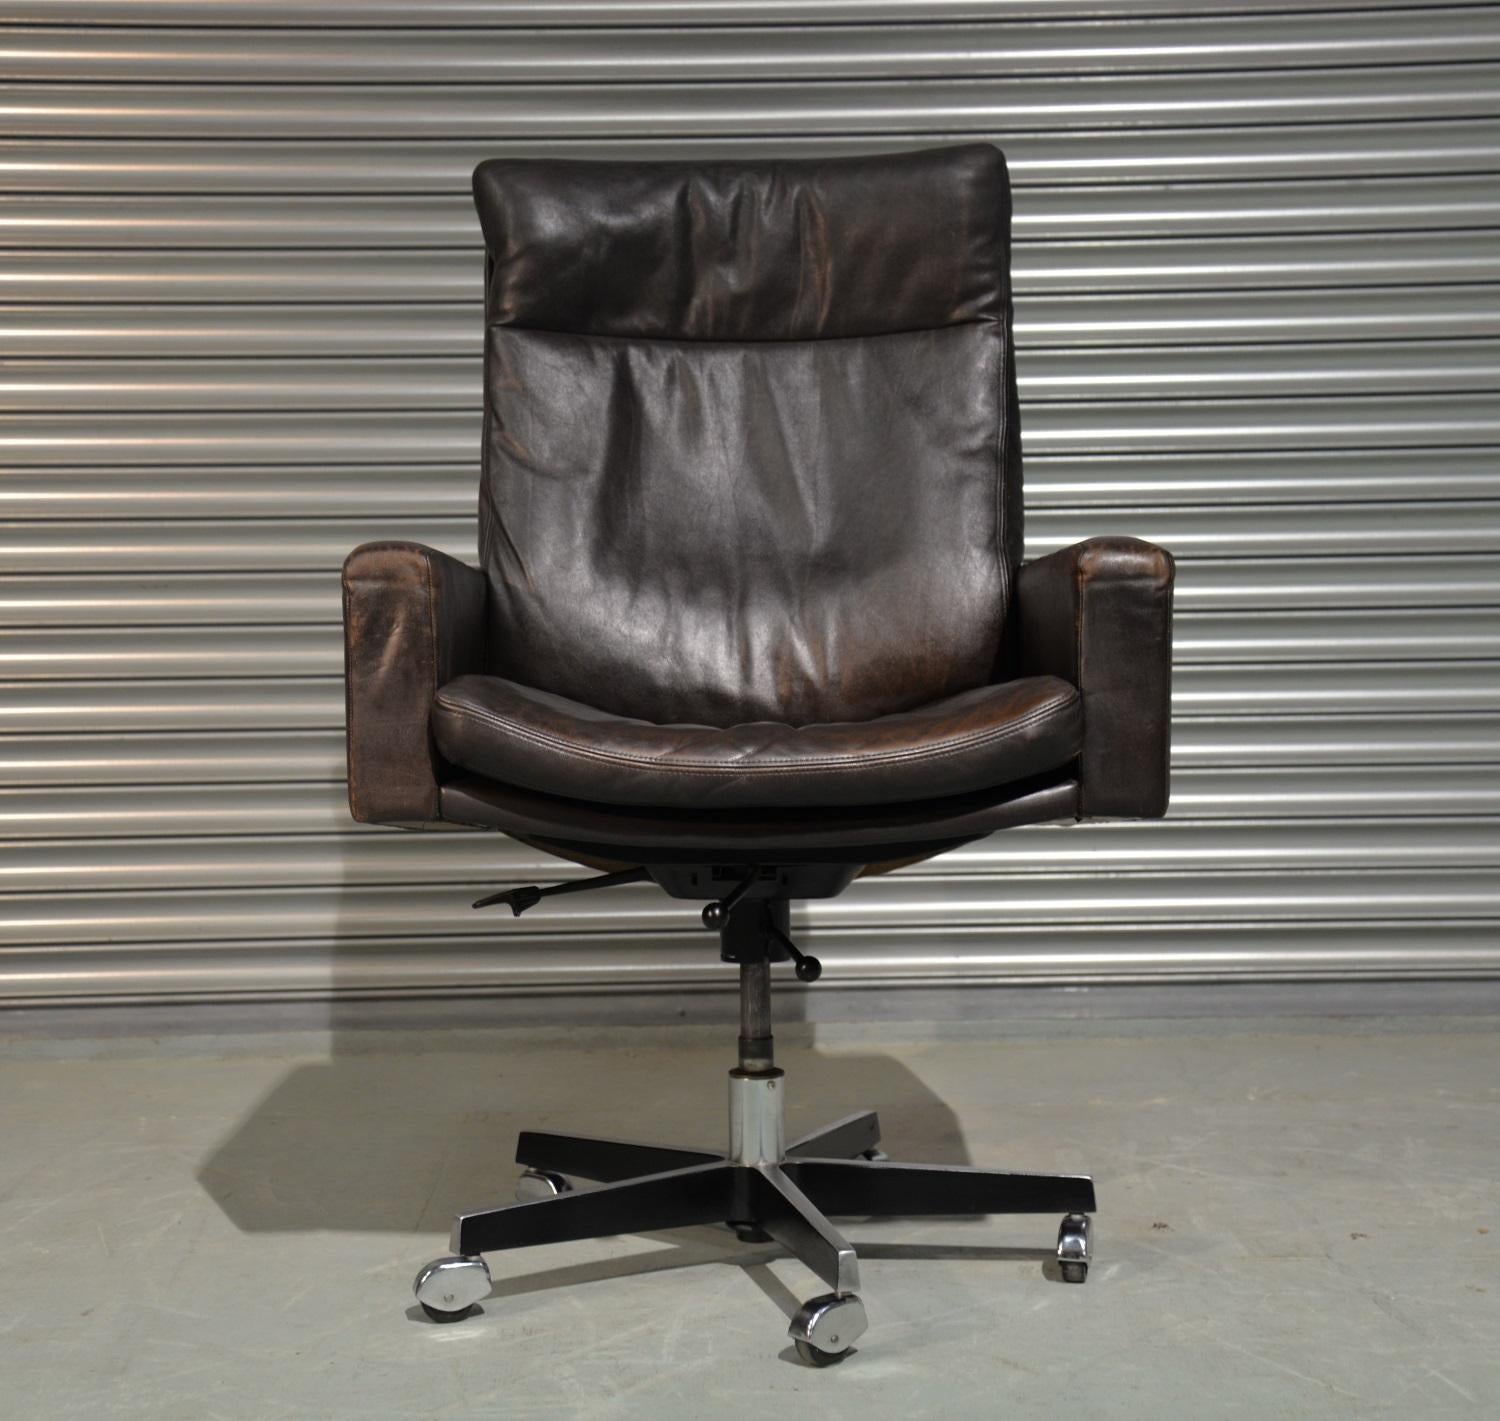 Discounted airfreight for our US and International customers ( from 2 weeks door to door) 

We are delighted to bring to you a highly desirable vintage Robert Haussmann swivel highback armchair for de Sede. Rarely available and built in the late